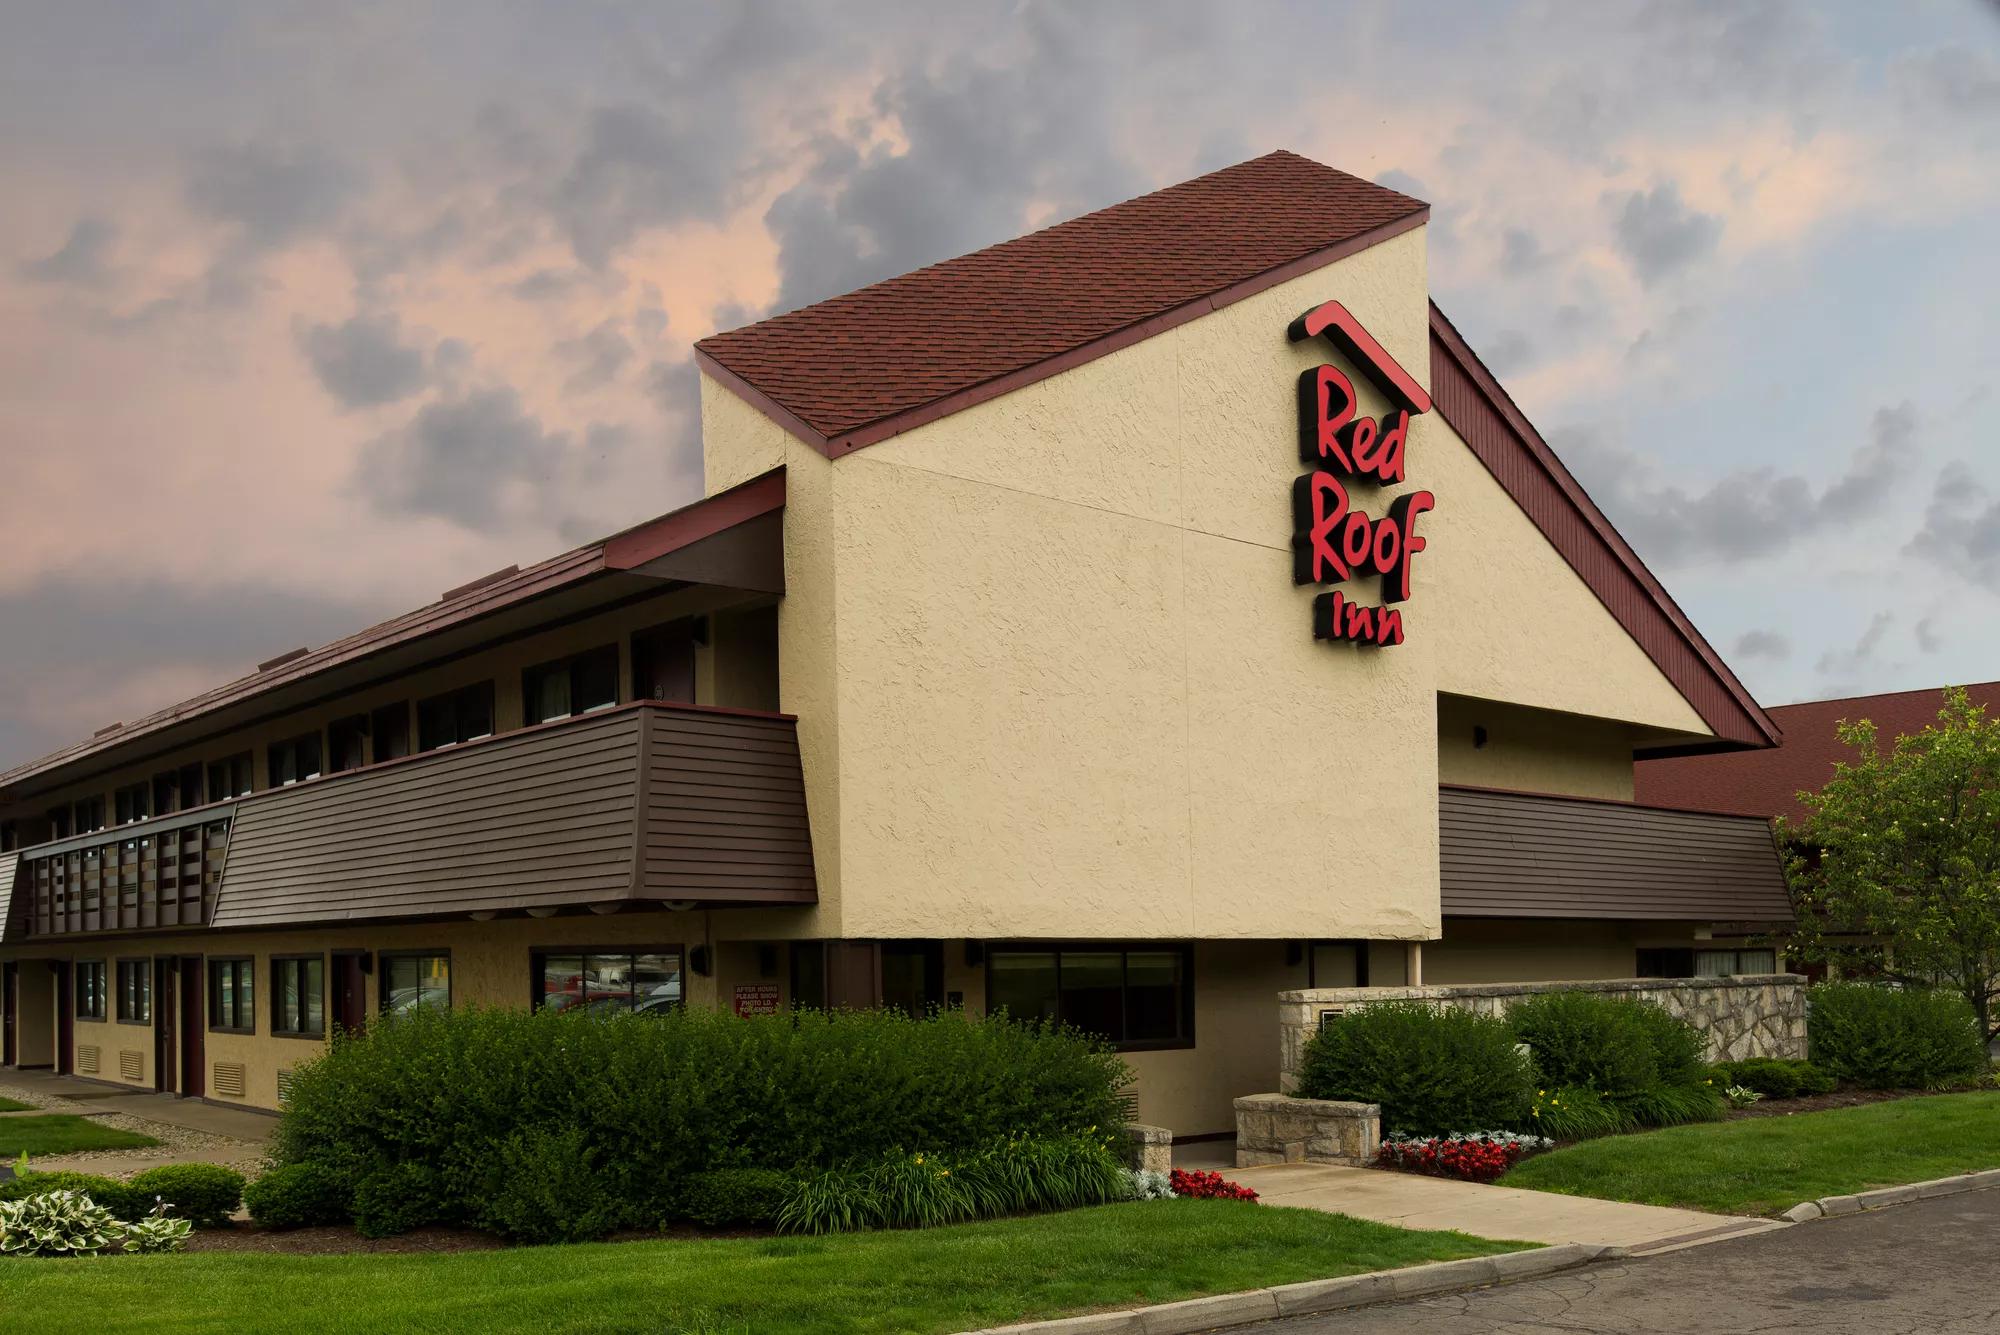 Red Roof Inn Dayton North Airport Property Exterior Image